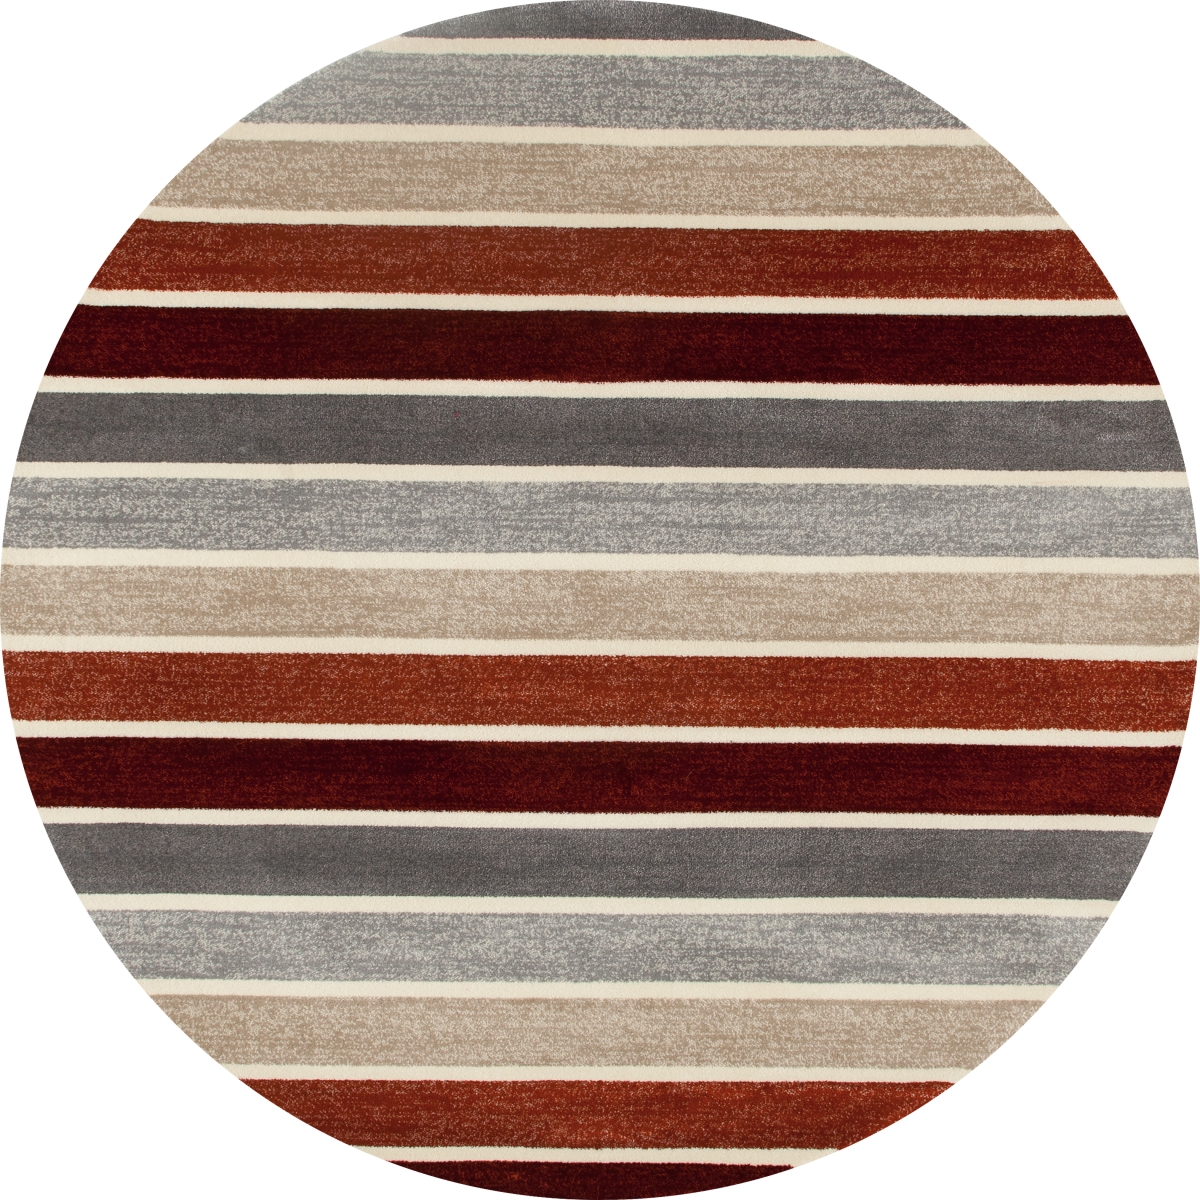 25818 8 Ft. Troy Collection Mainline Woven Round Area Rug, Red